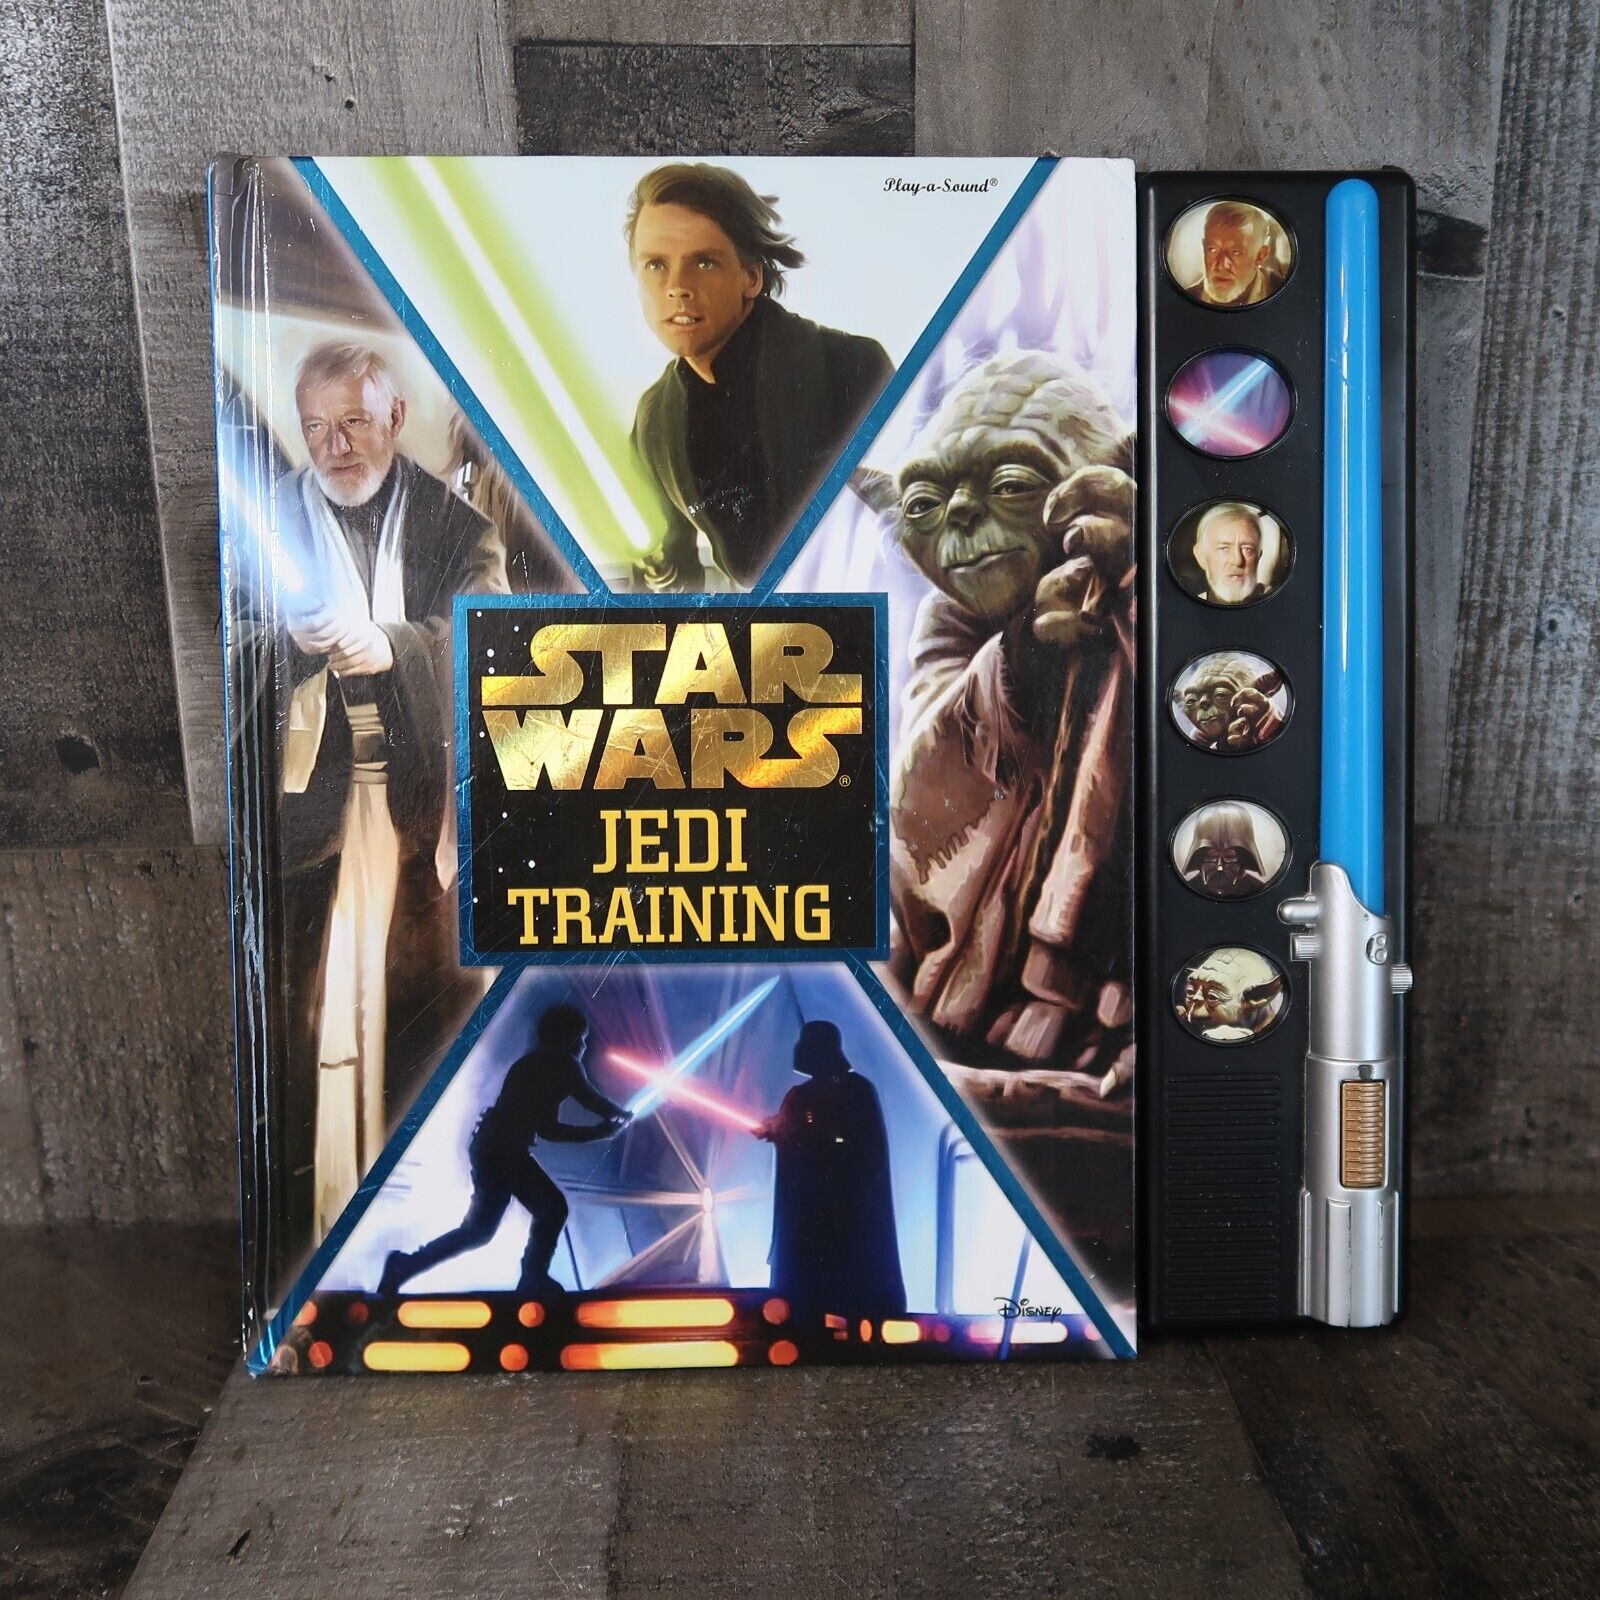 Star Wars Jedi Training Battery Operated Book Lights Up & Has Sounds